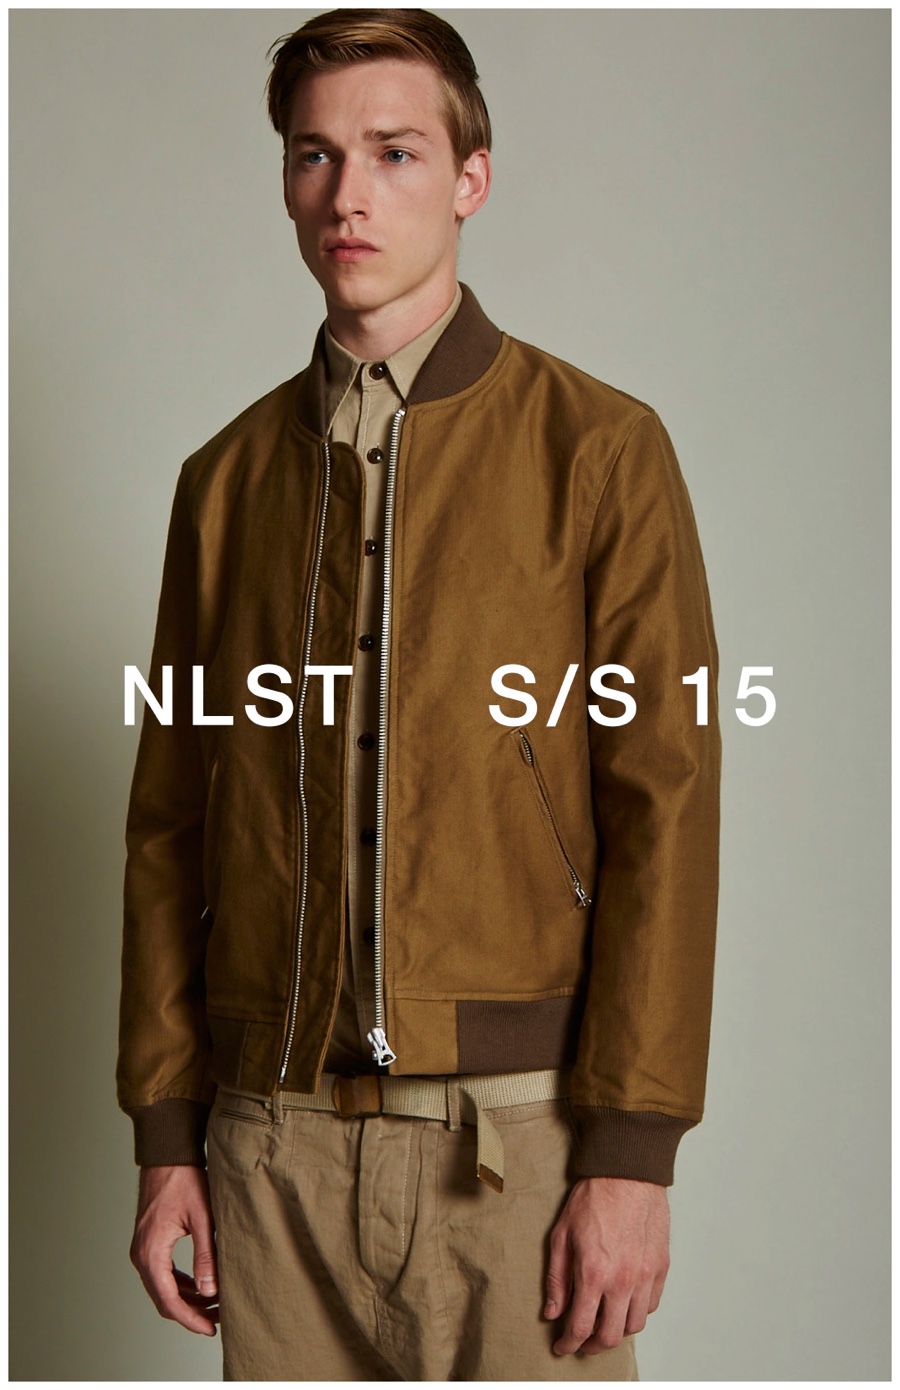 Enlisting Style Aficionados: NLST Does Army Chic for Spring 2015 Collection